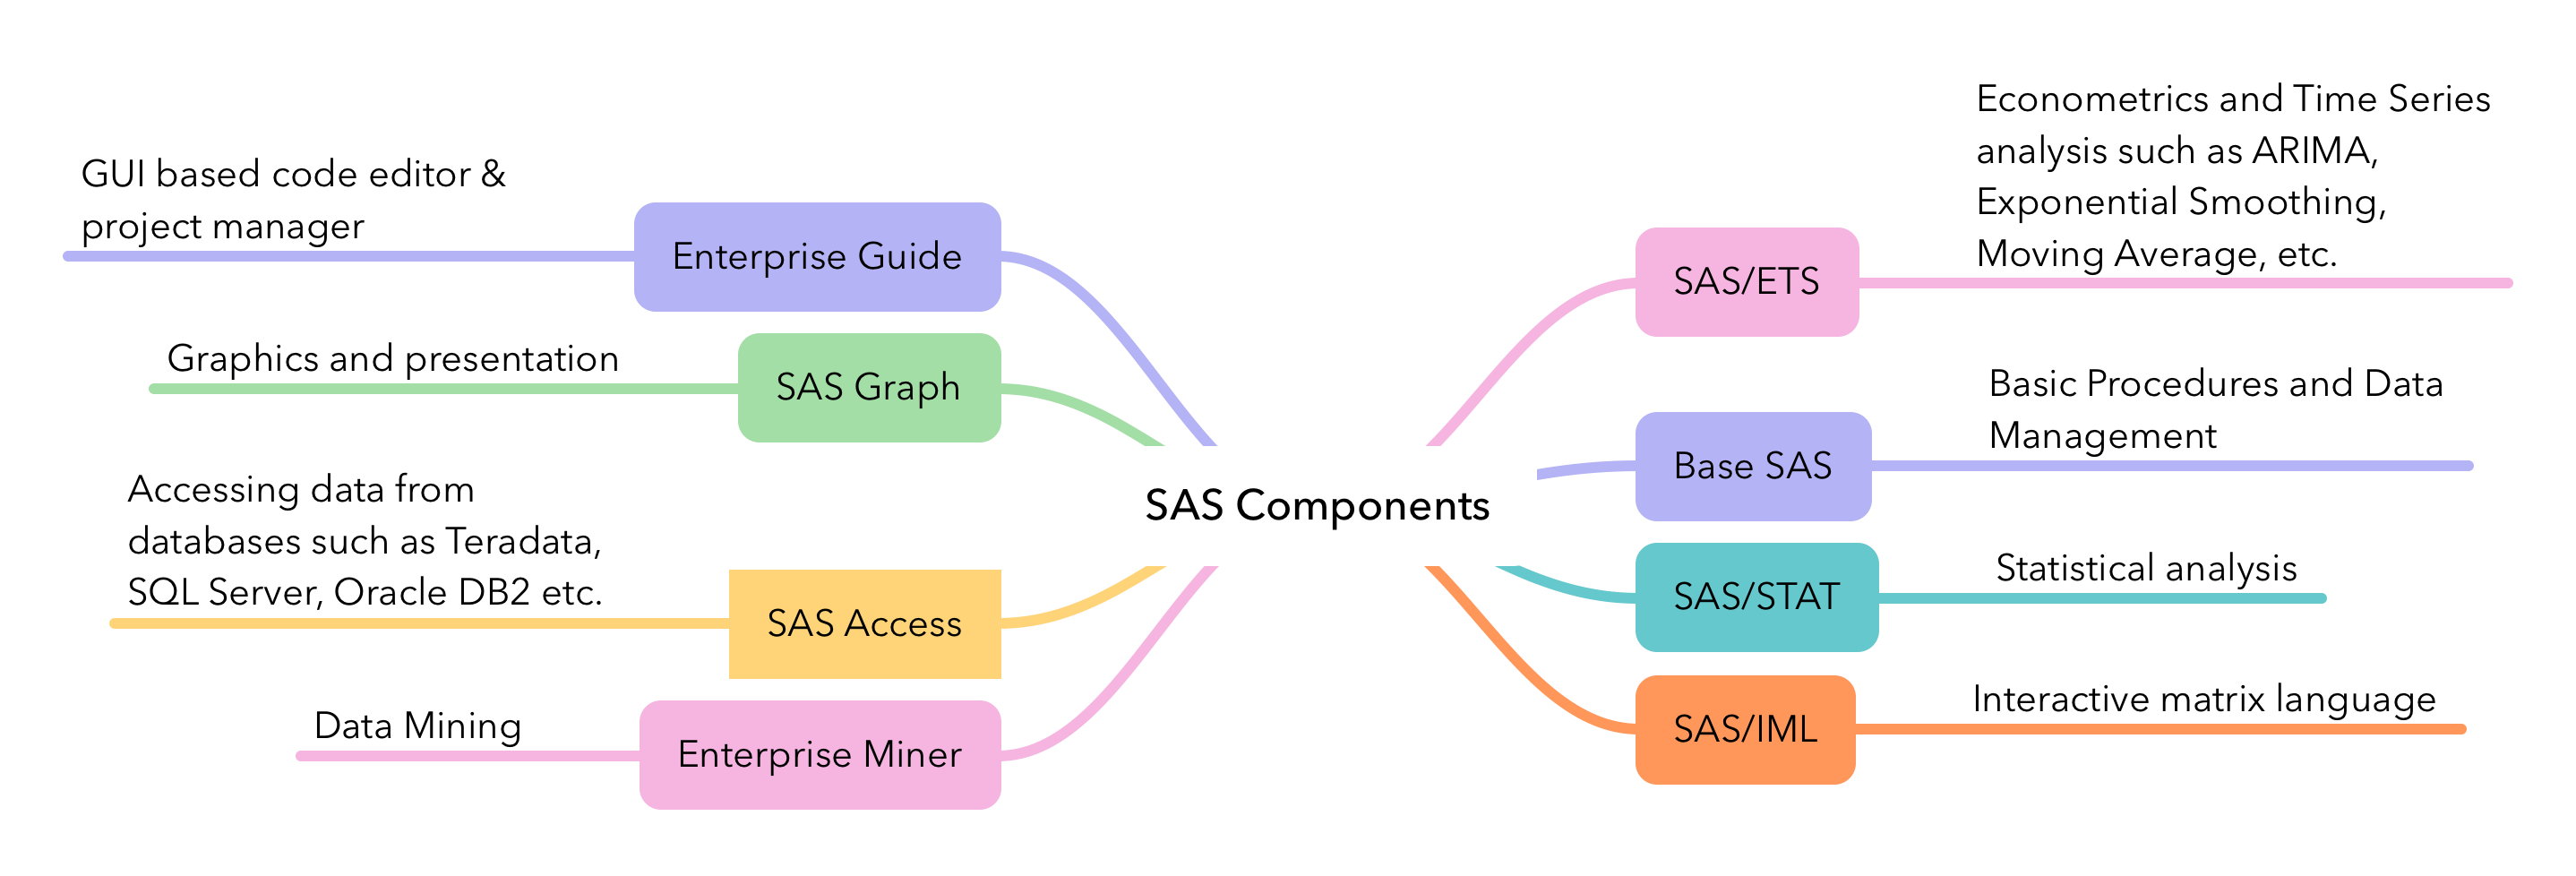 Getting Started with SAS